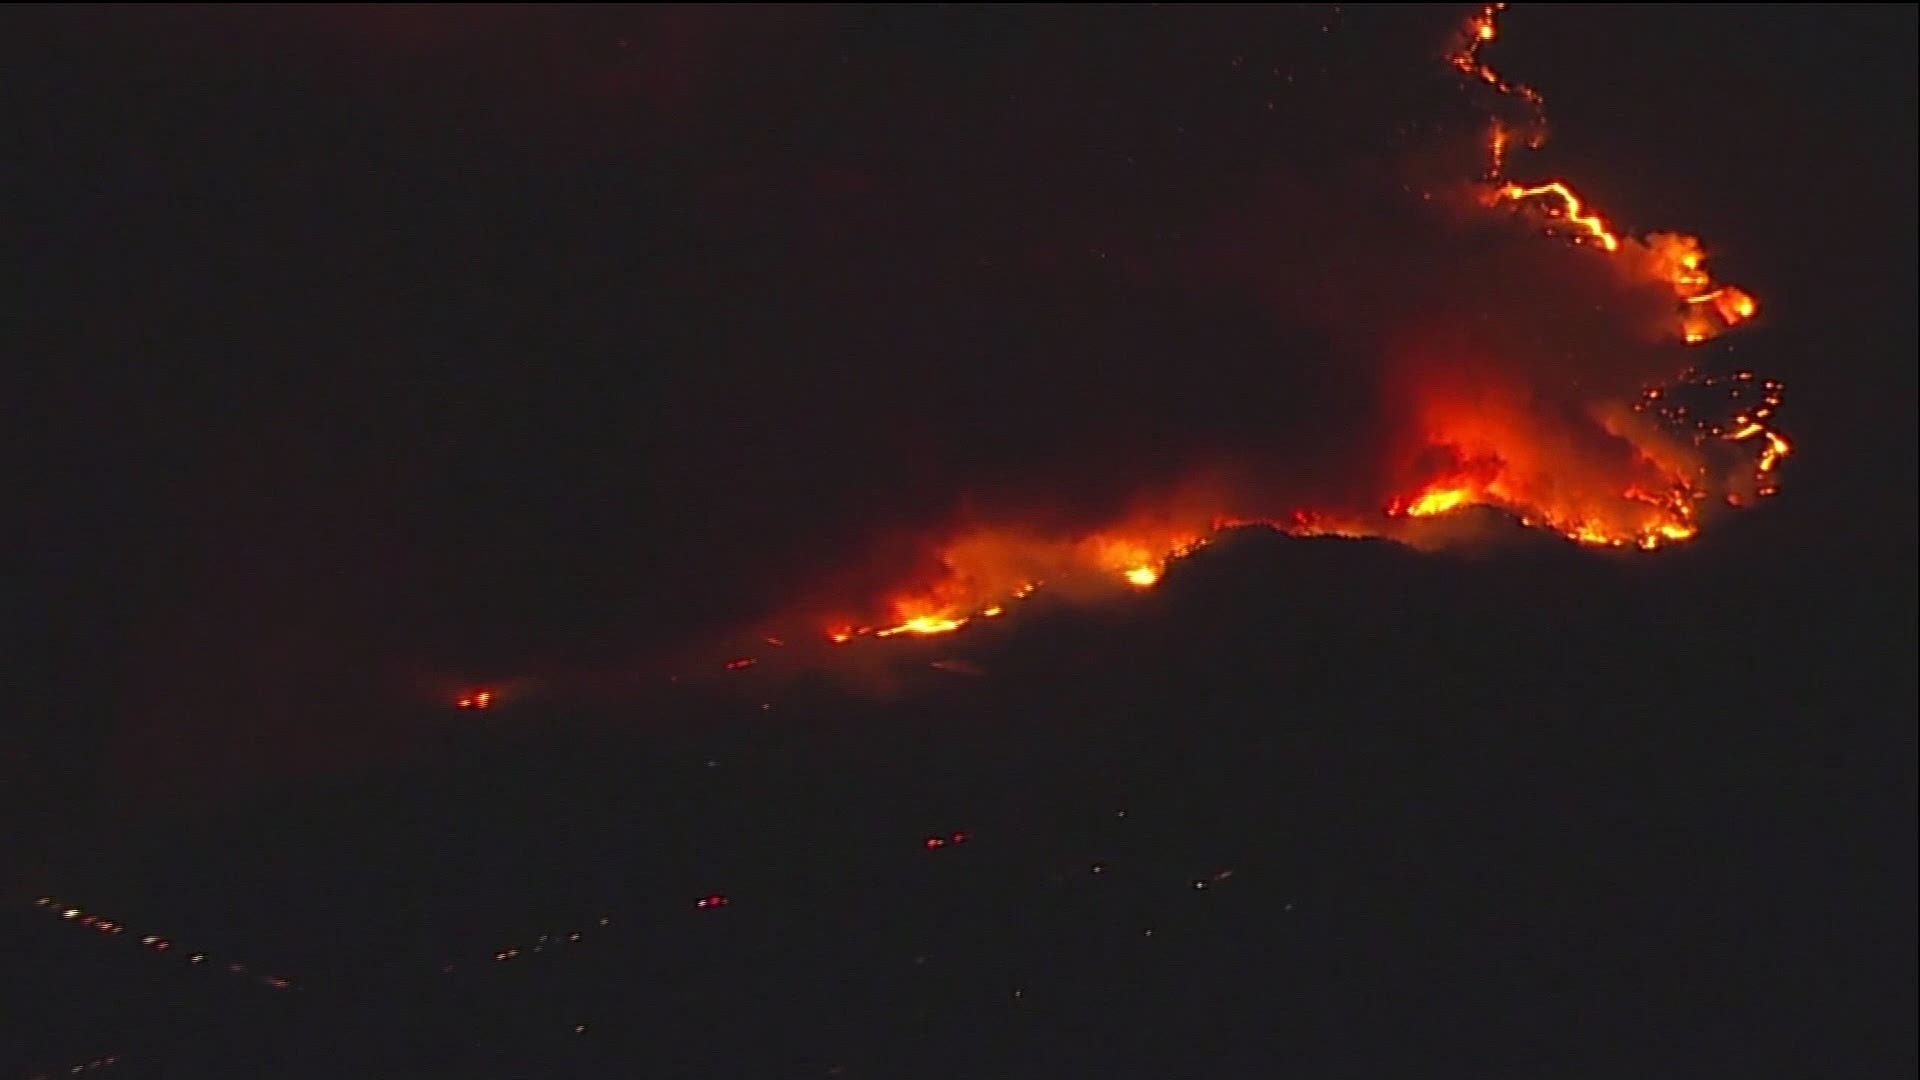 The Kincade fire in Northern California has forced hundreds to evacuate.